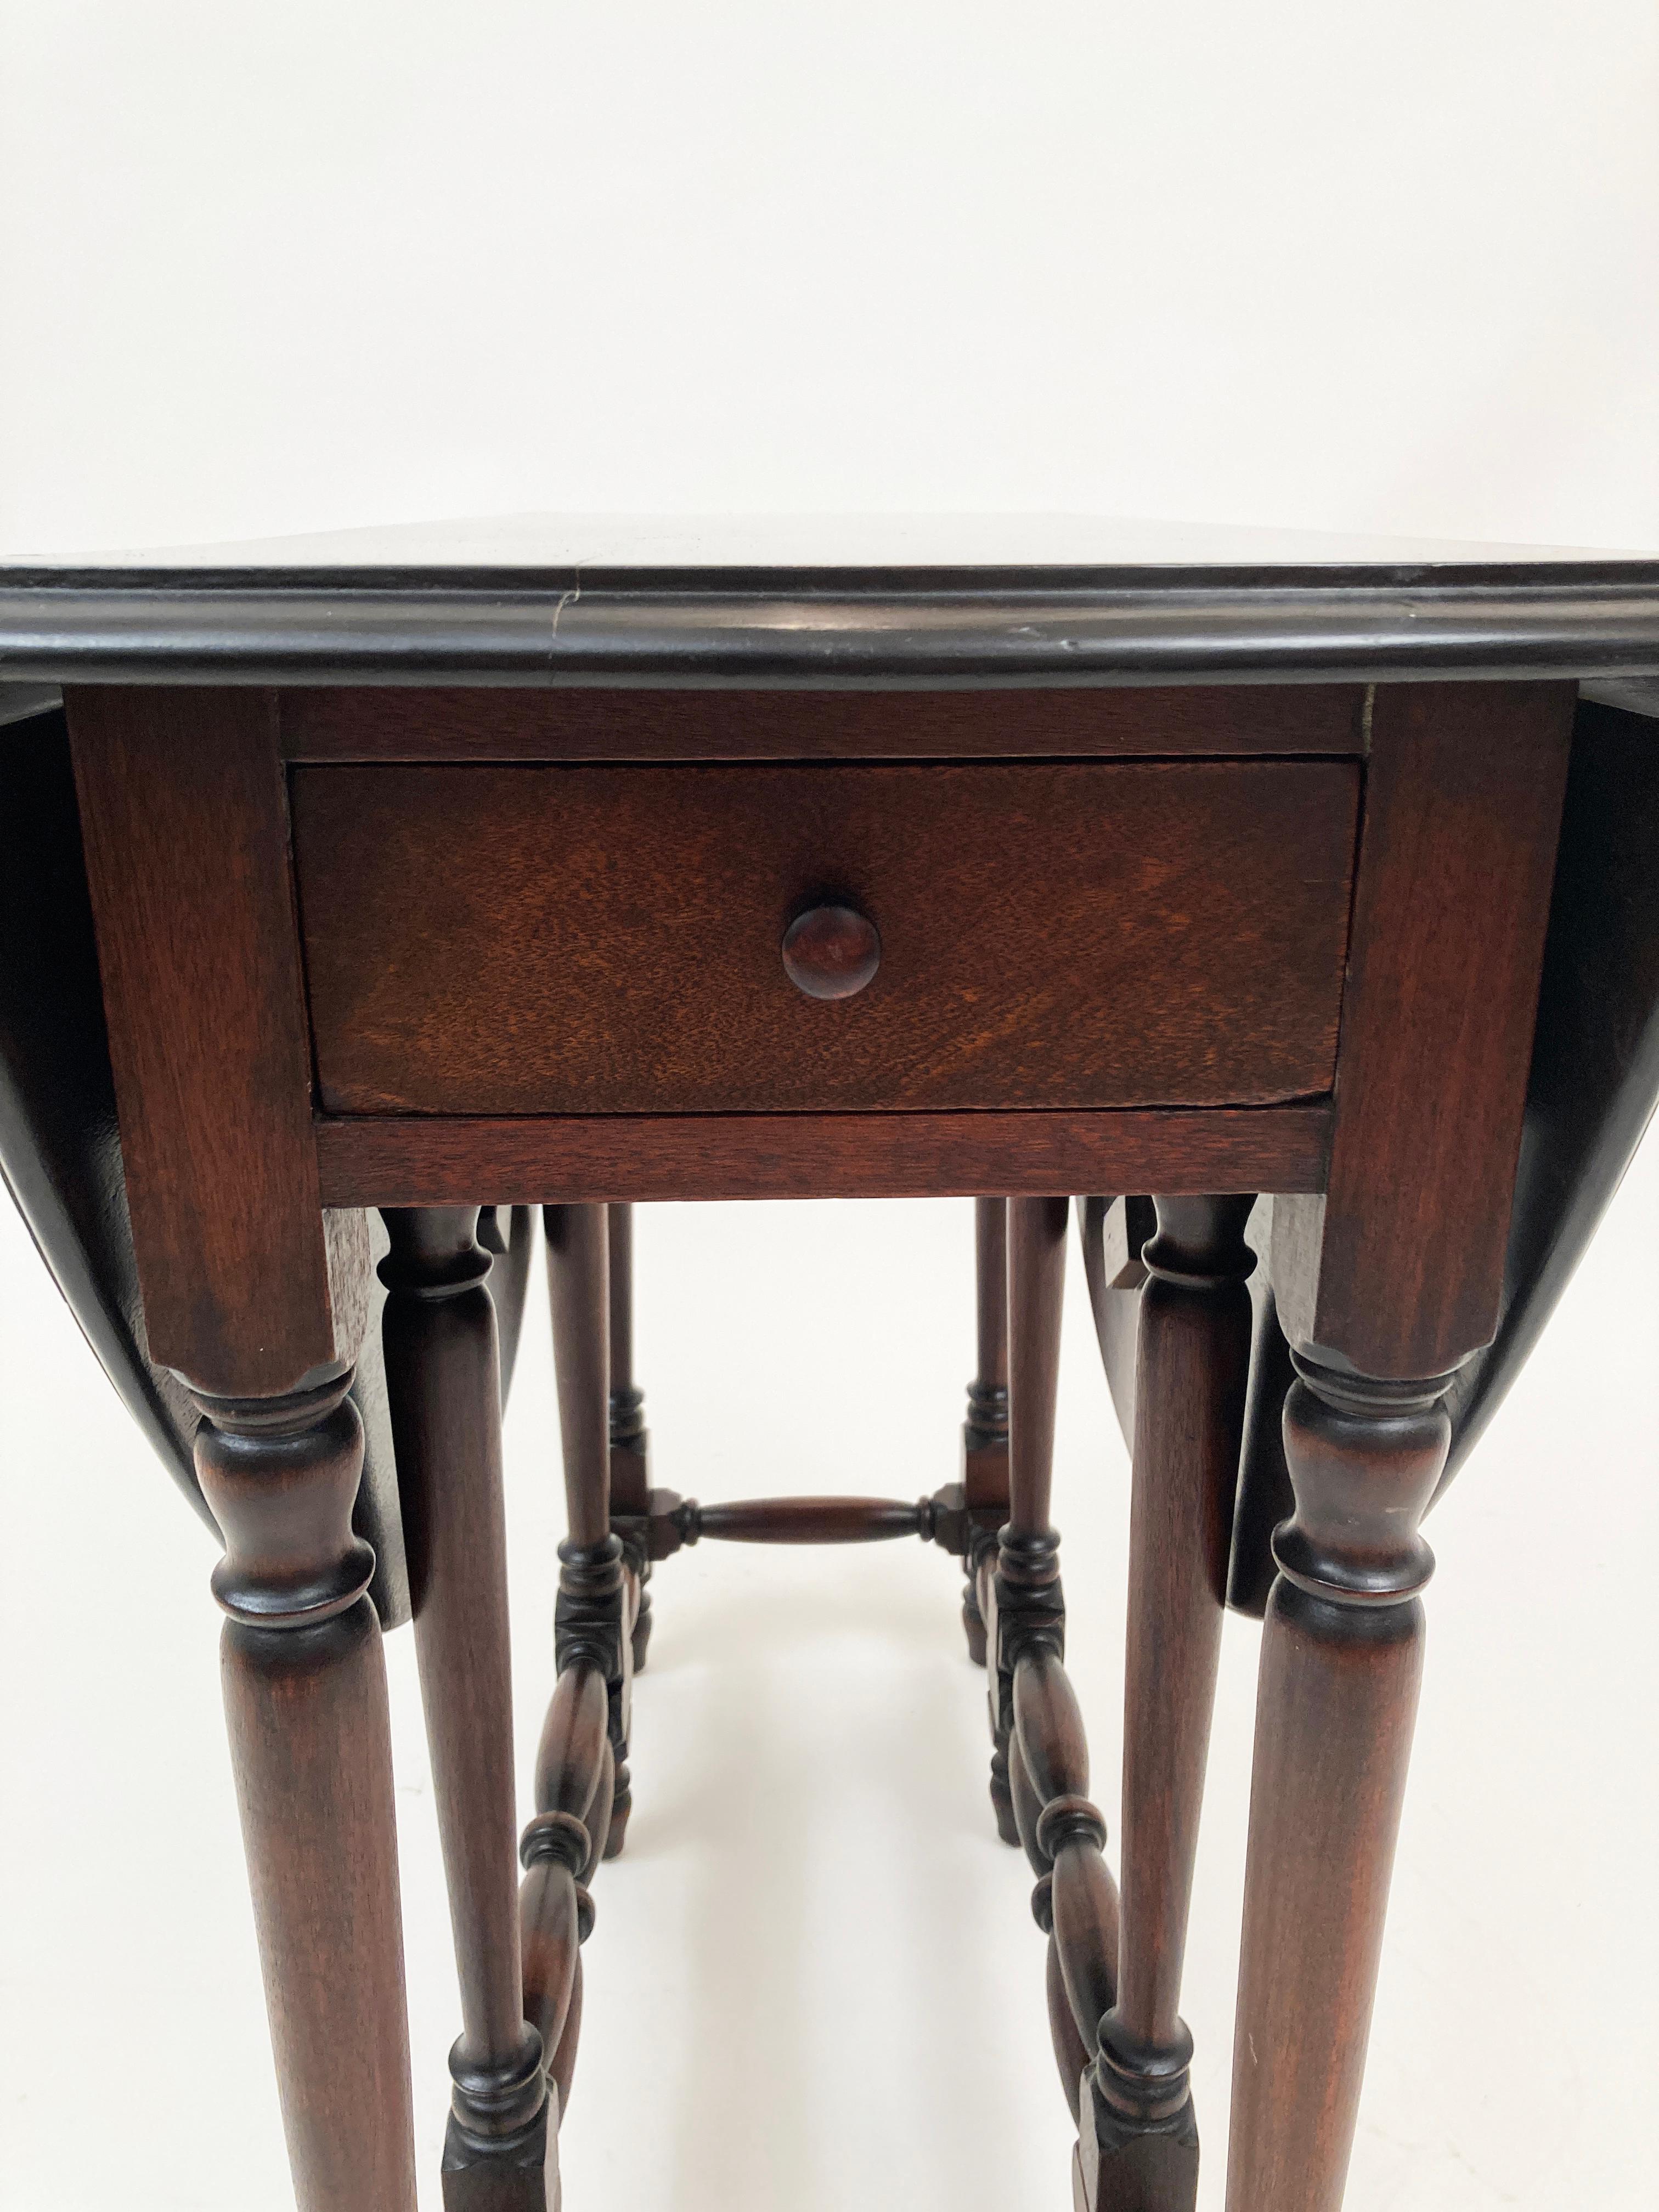 Late 18th Century English William and Mary Drop Leaf Gate-Leg Walnut Table For Sale 4